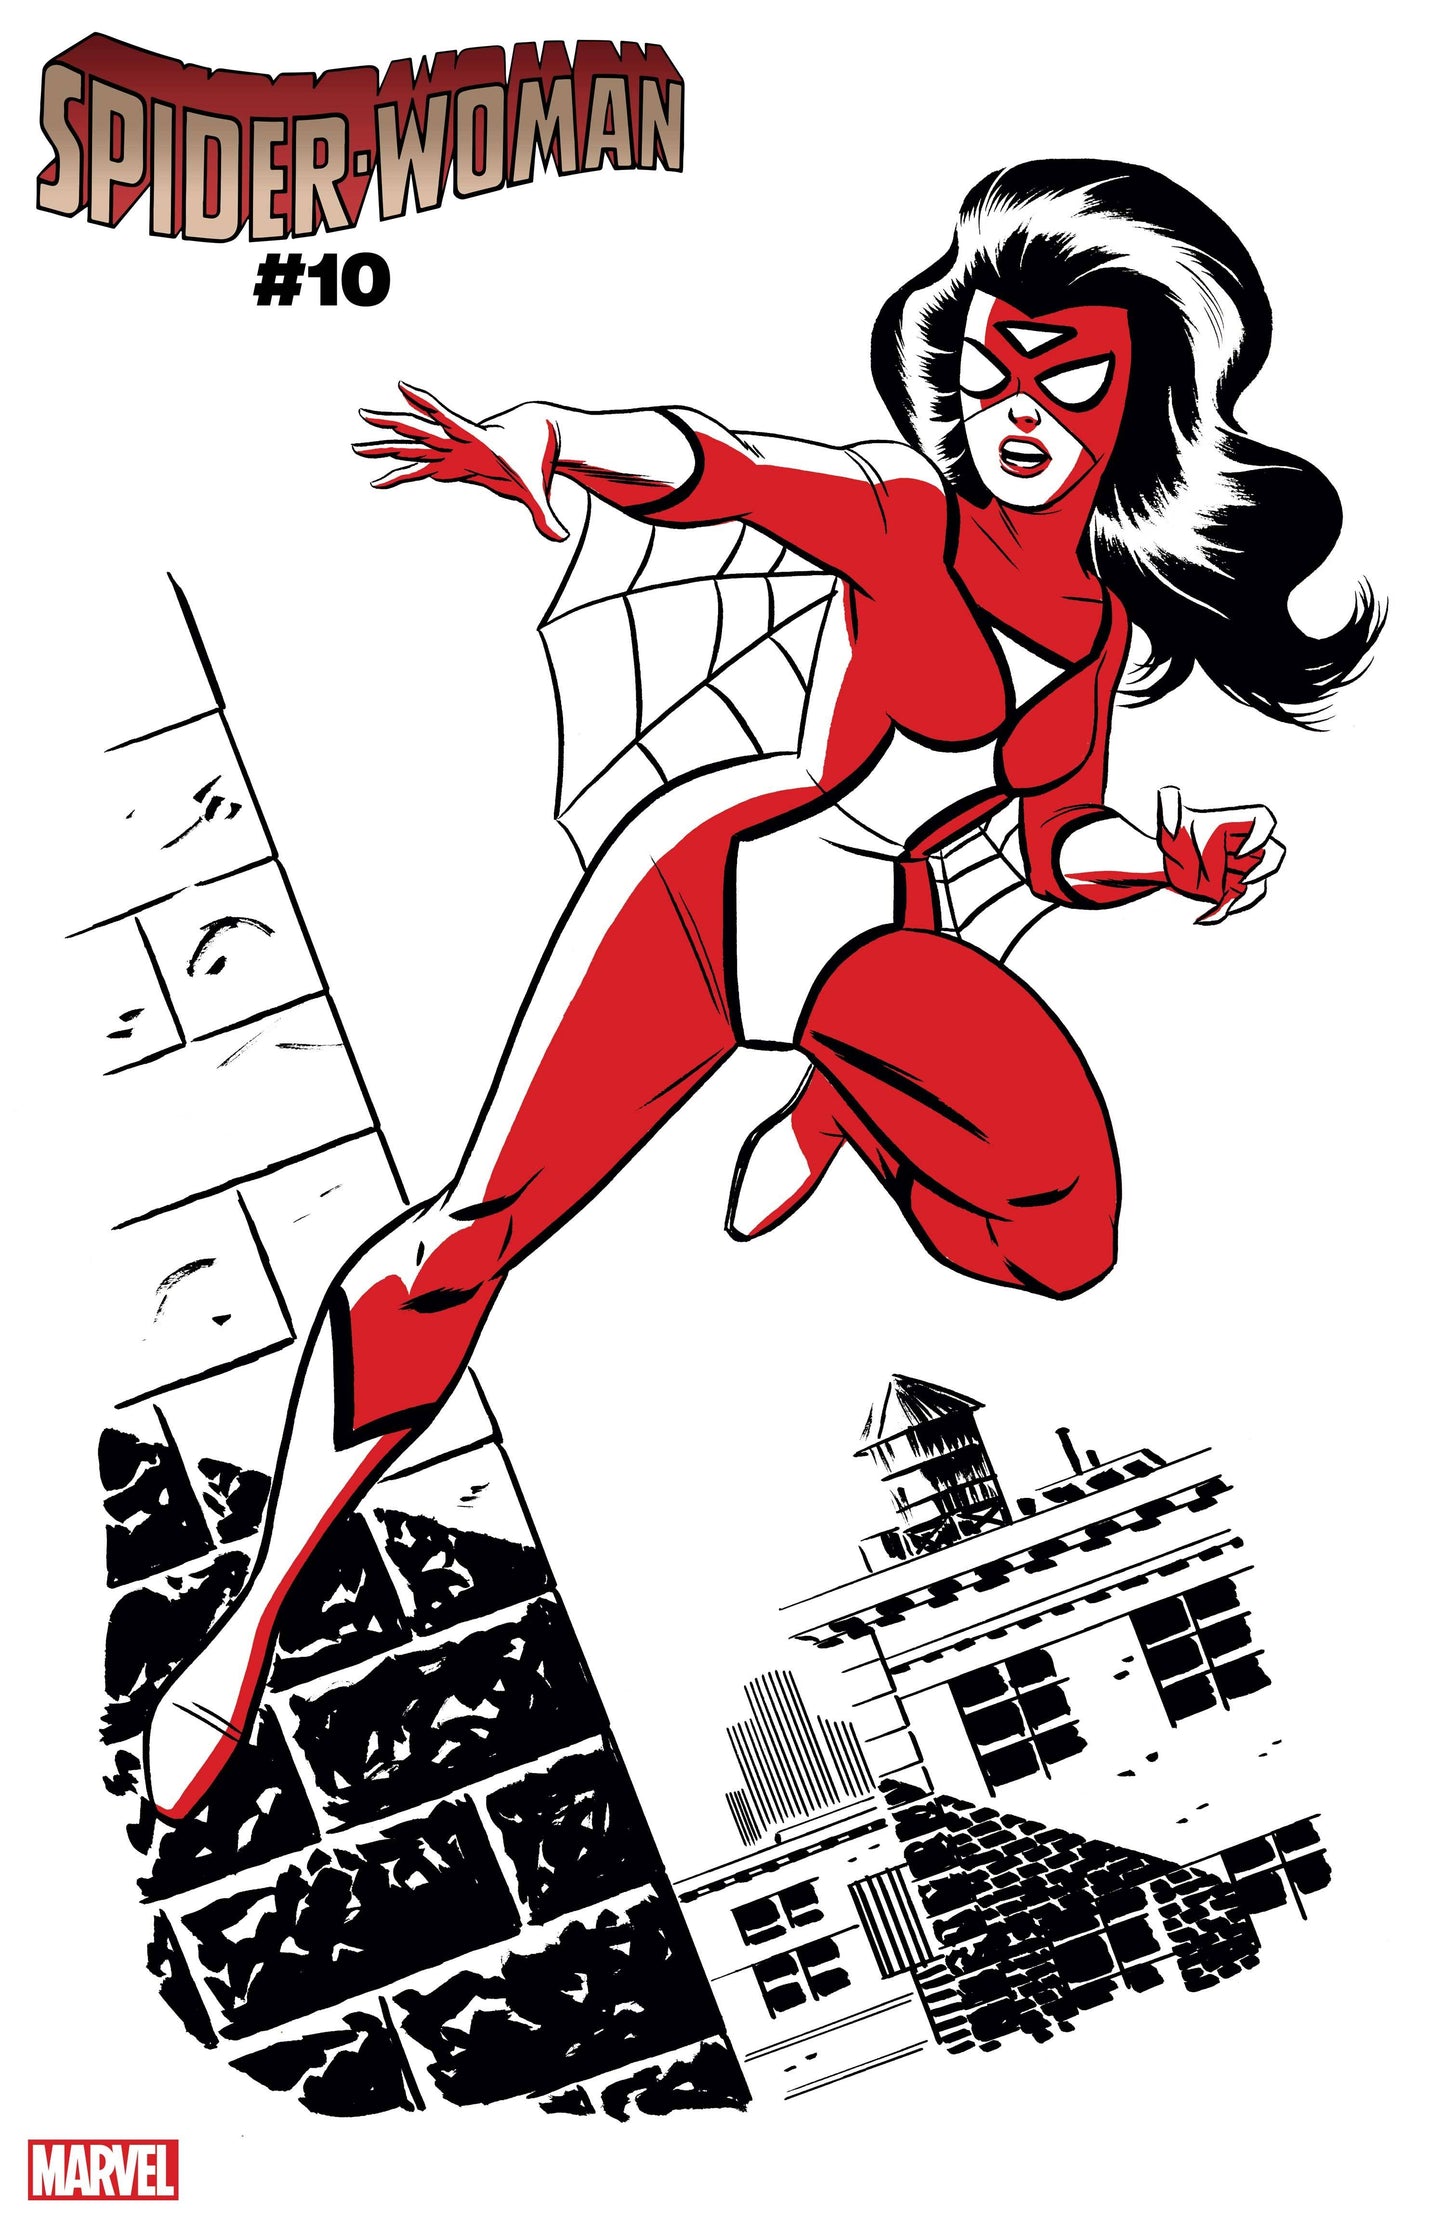 SPIDER-WOMAN #10 MICHAEL CHO SPIDER-WOMAN TWO-TONE VARIANT 2021